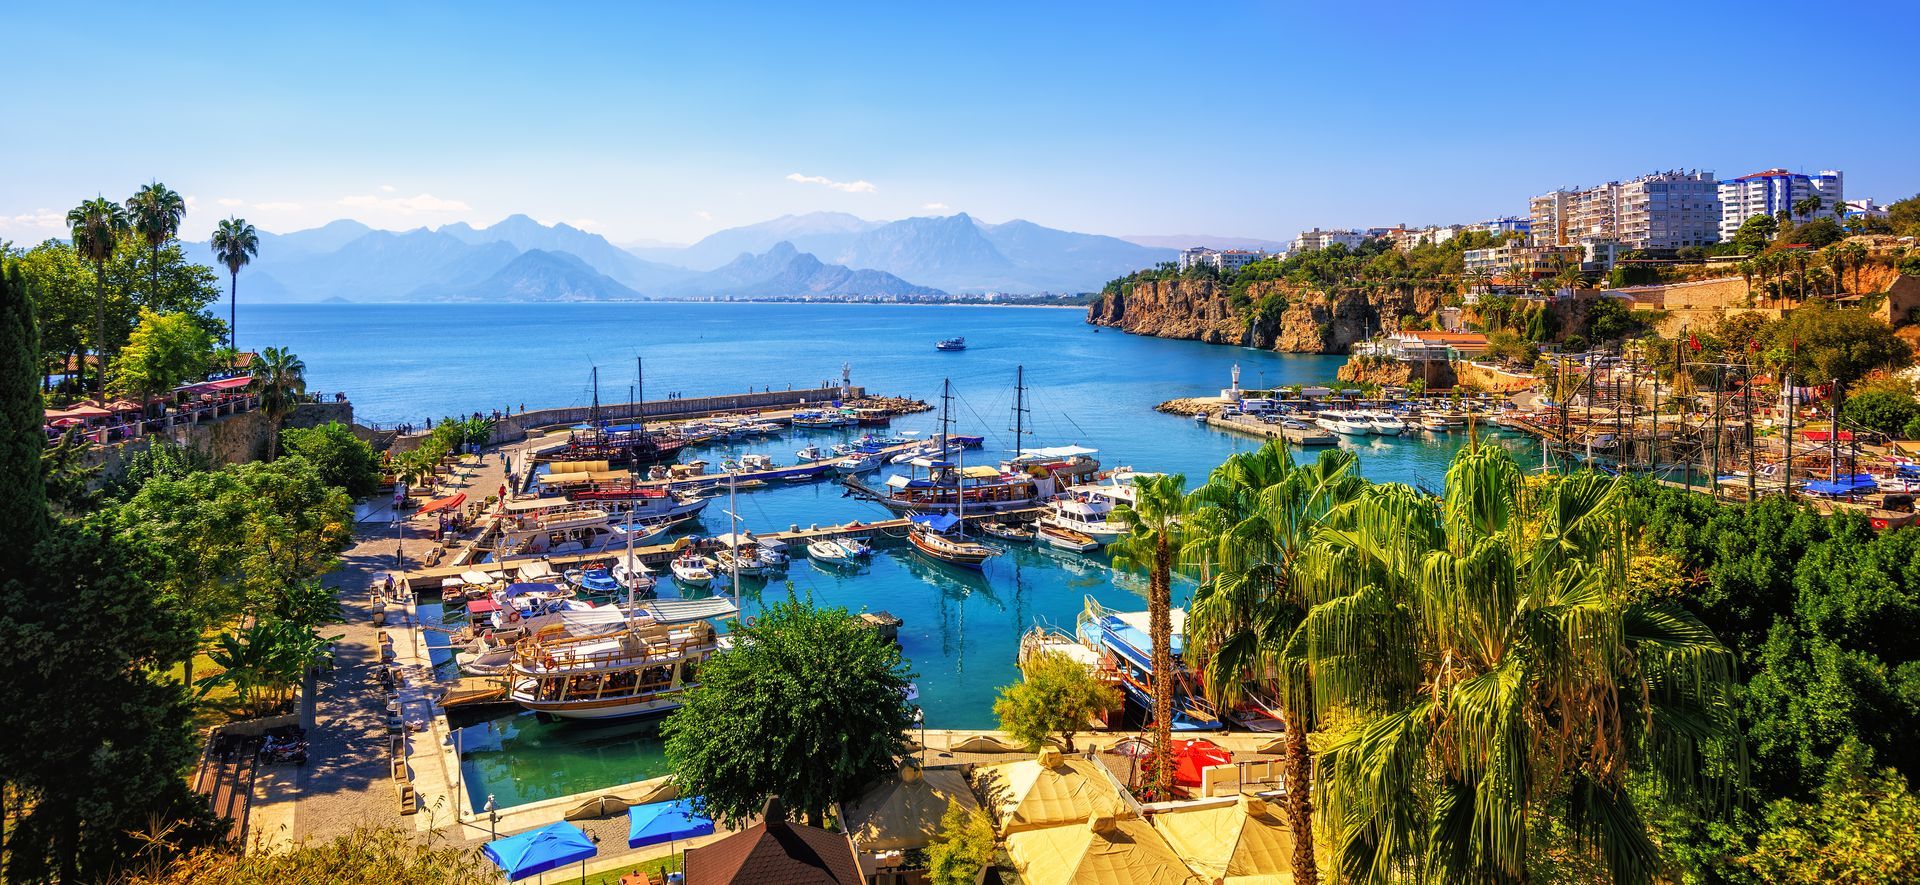 Antalya's Old City Marina: Offering picturesque views of historic landmarks.